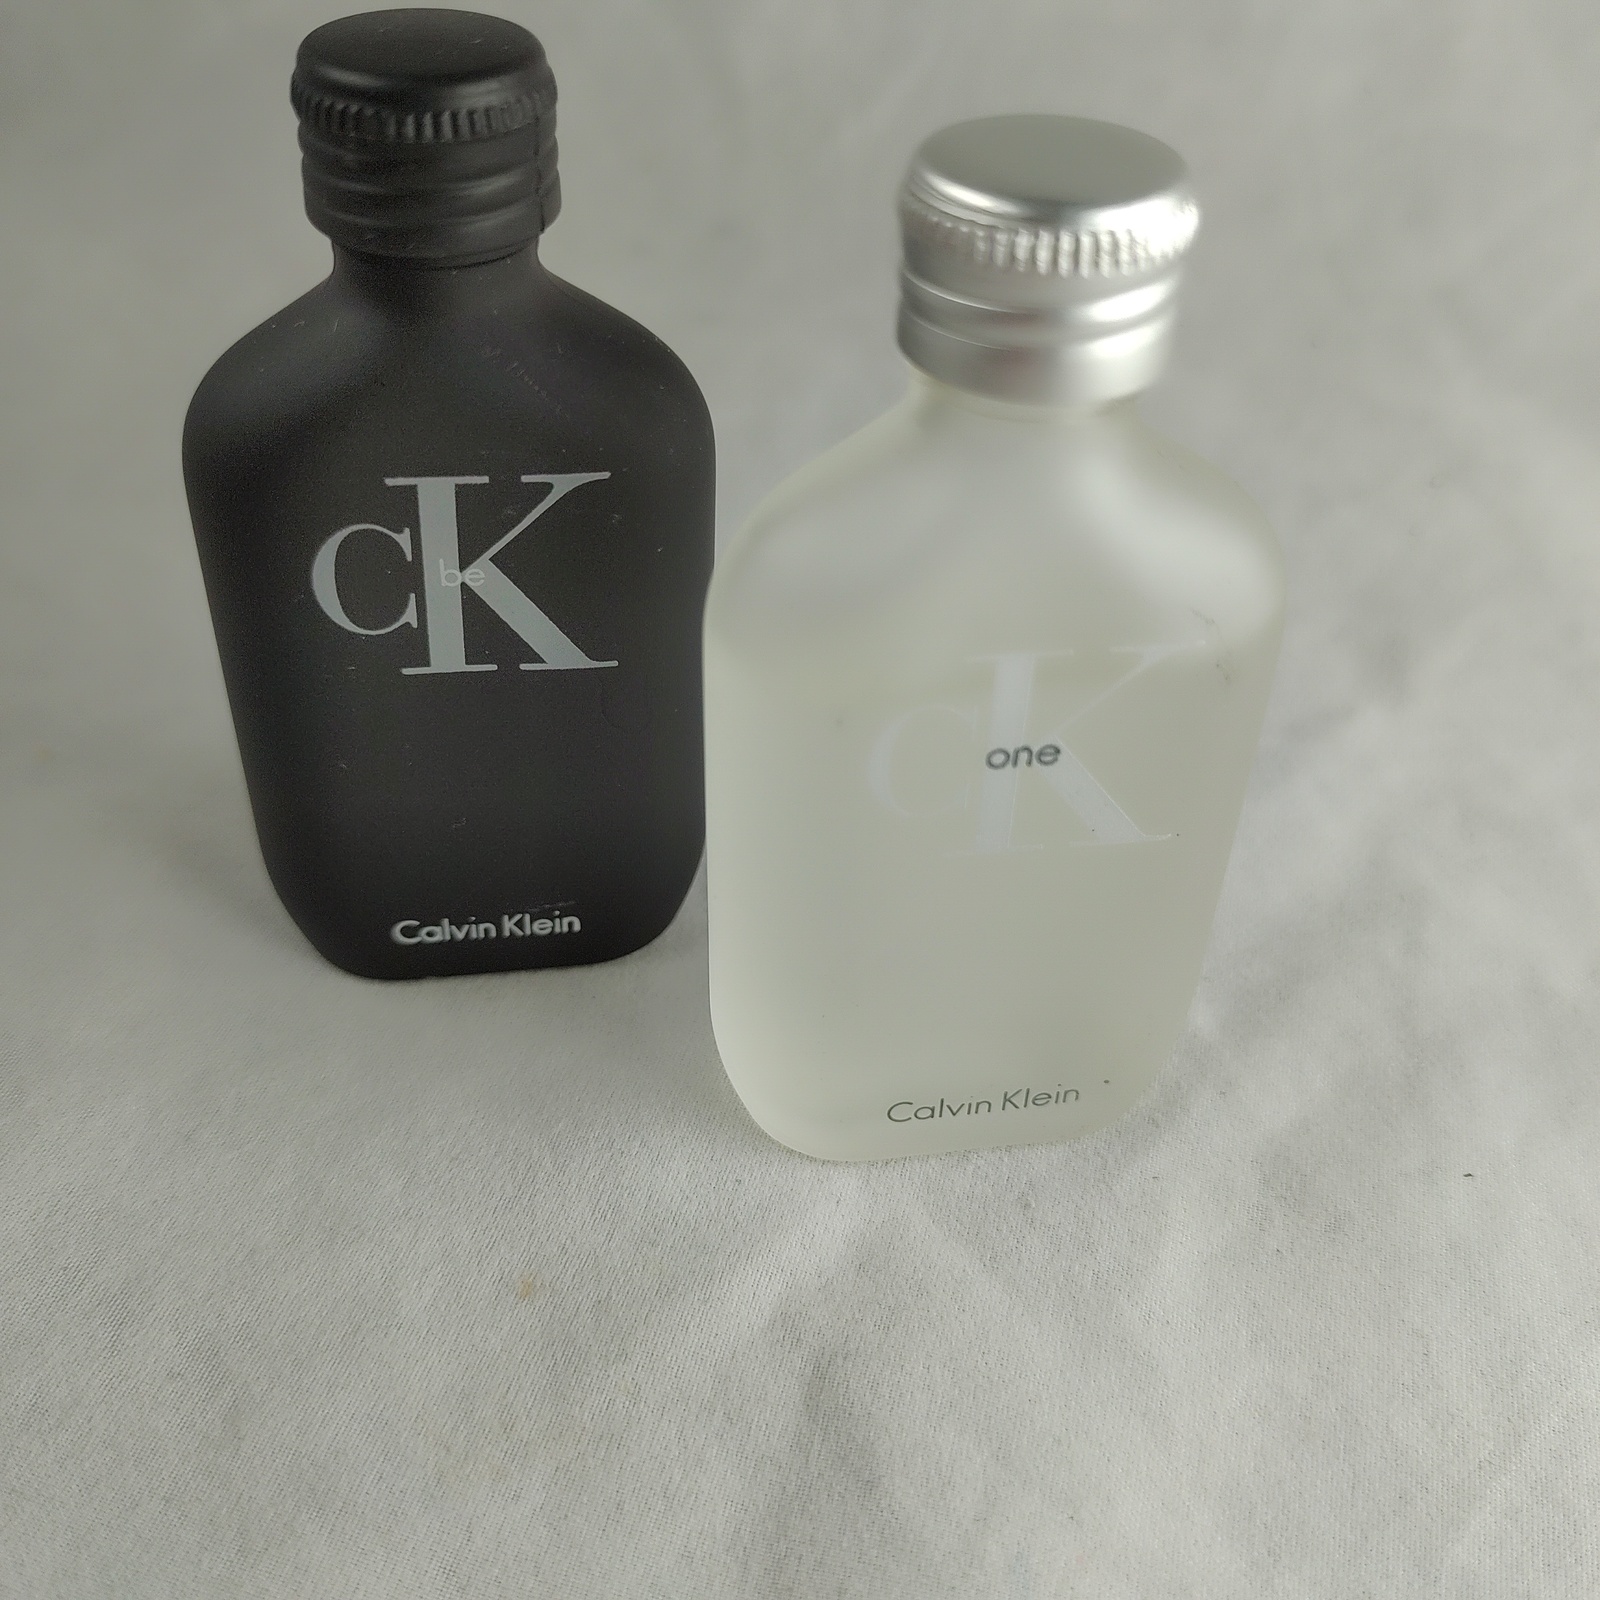 2 Mini Size Bottles Calvin Klein Unisex Colognes; One and Be Sealed .5 Oz Each  - $17.95